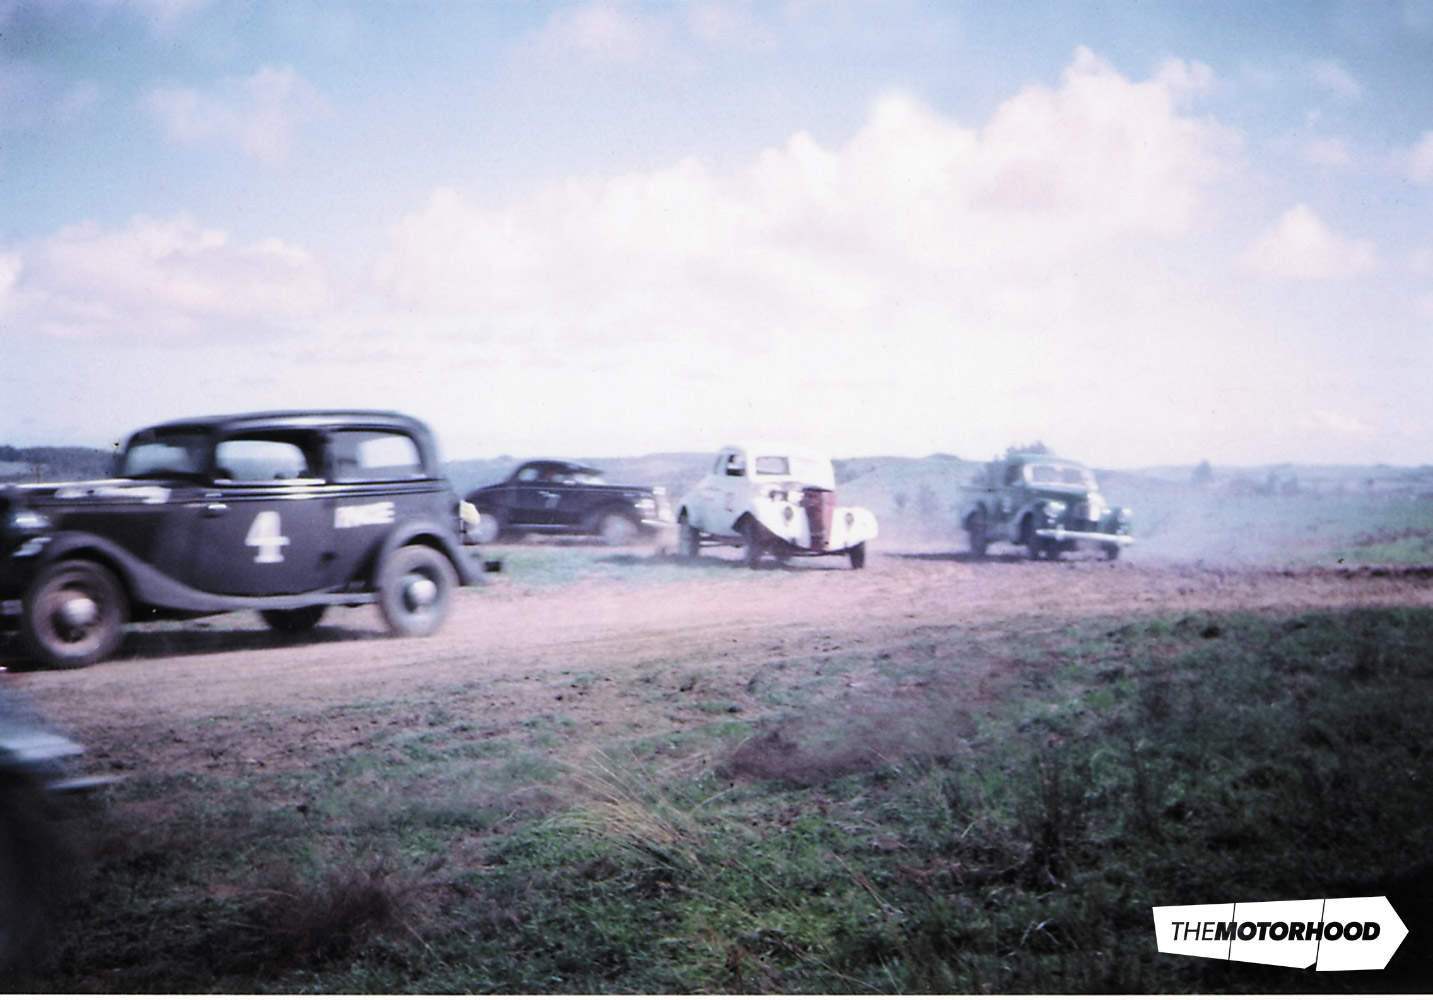 Kicking up the dust at Worrall's Farm. Unknown sedan (a '34 V8) leads what could be Rob Campbell's white '37 coupe, with Alan Smail's A40 ute taking the outside line; Kumeu 1966 (Photo: Peter Lodge collection)